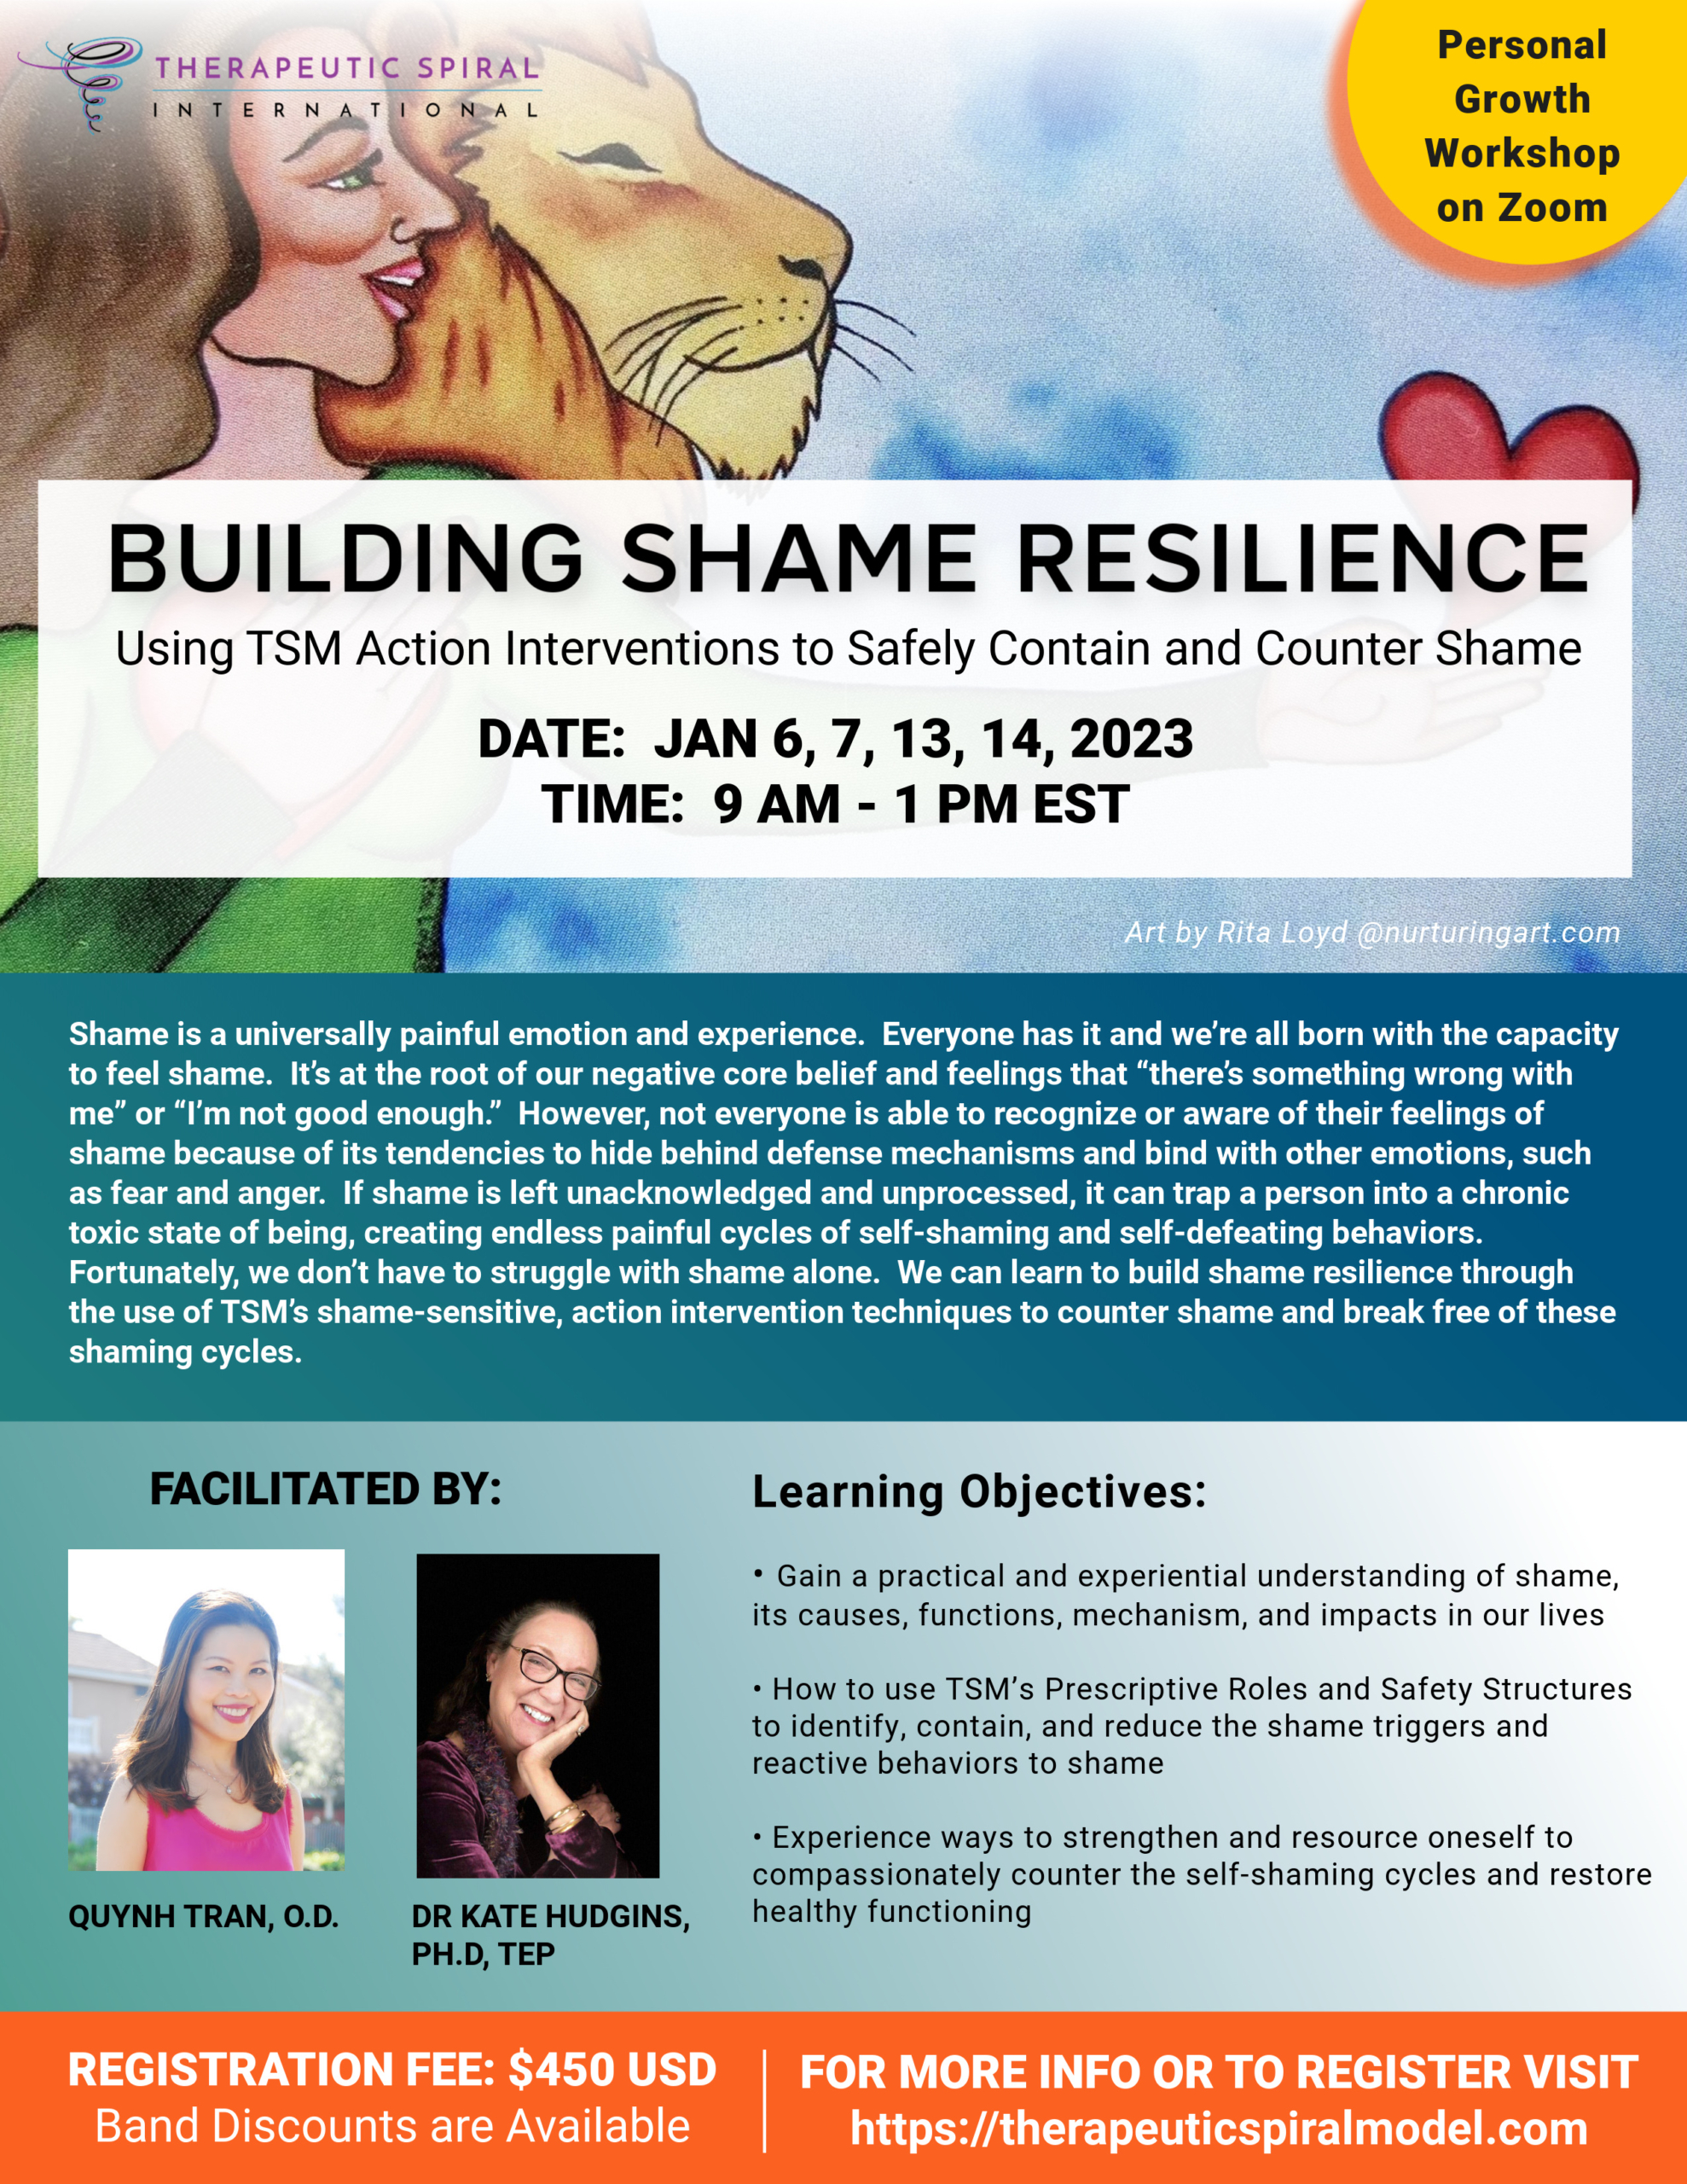 Building Shame Resilience